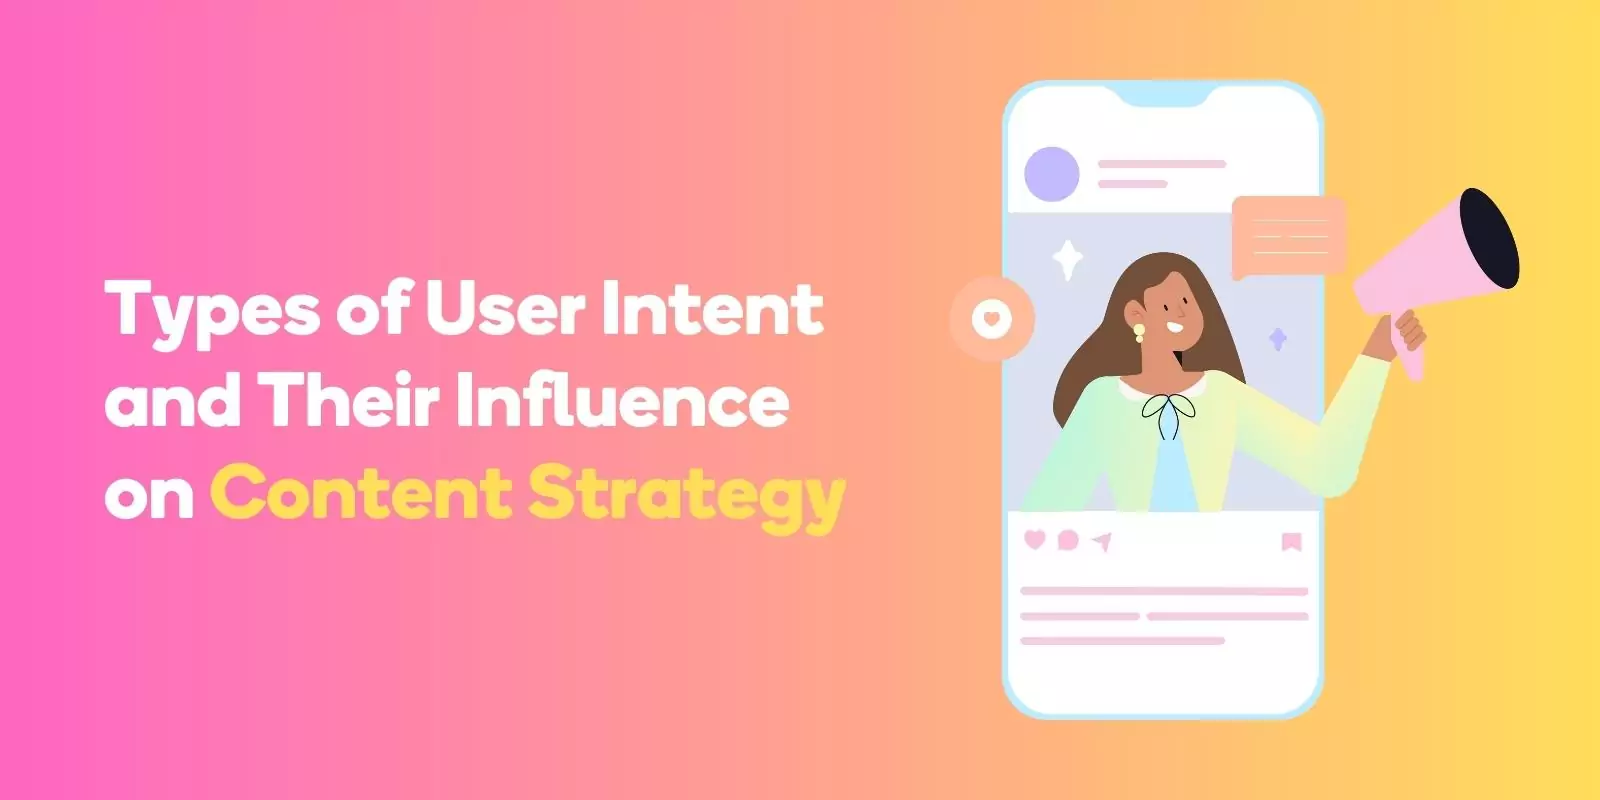 Types of User Intent and Their Influence on Content Strategy